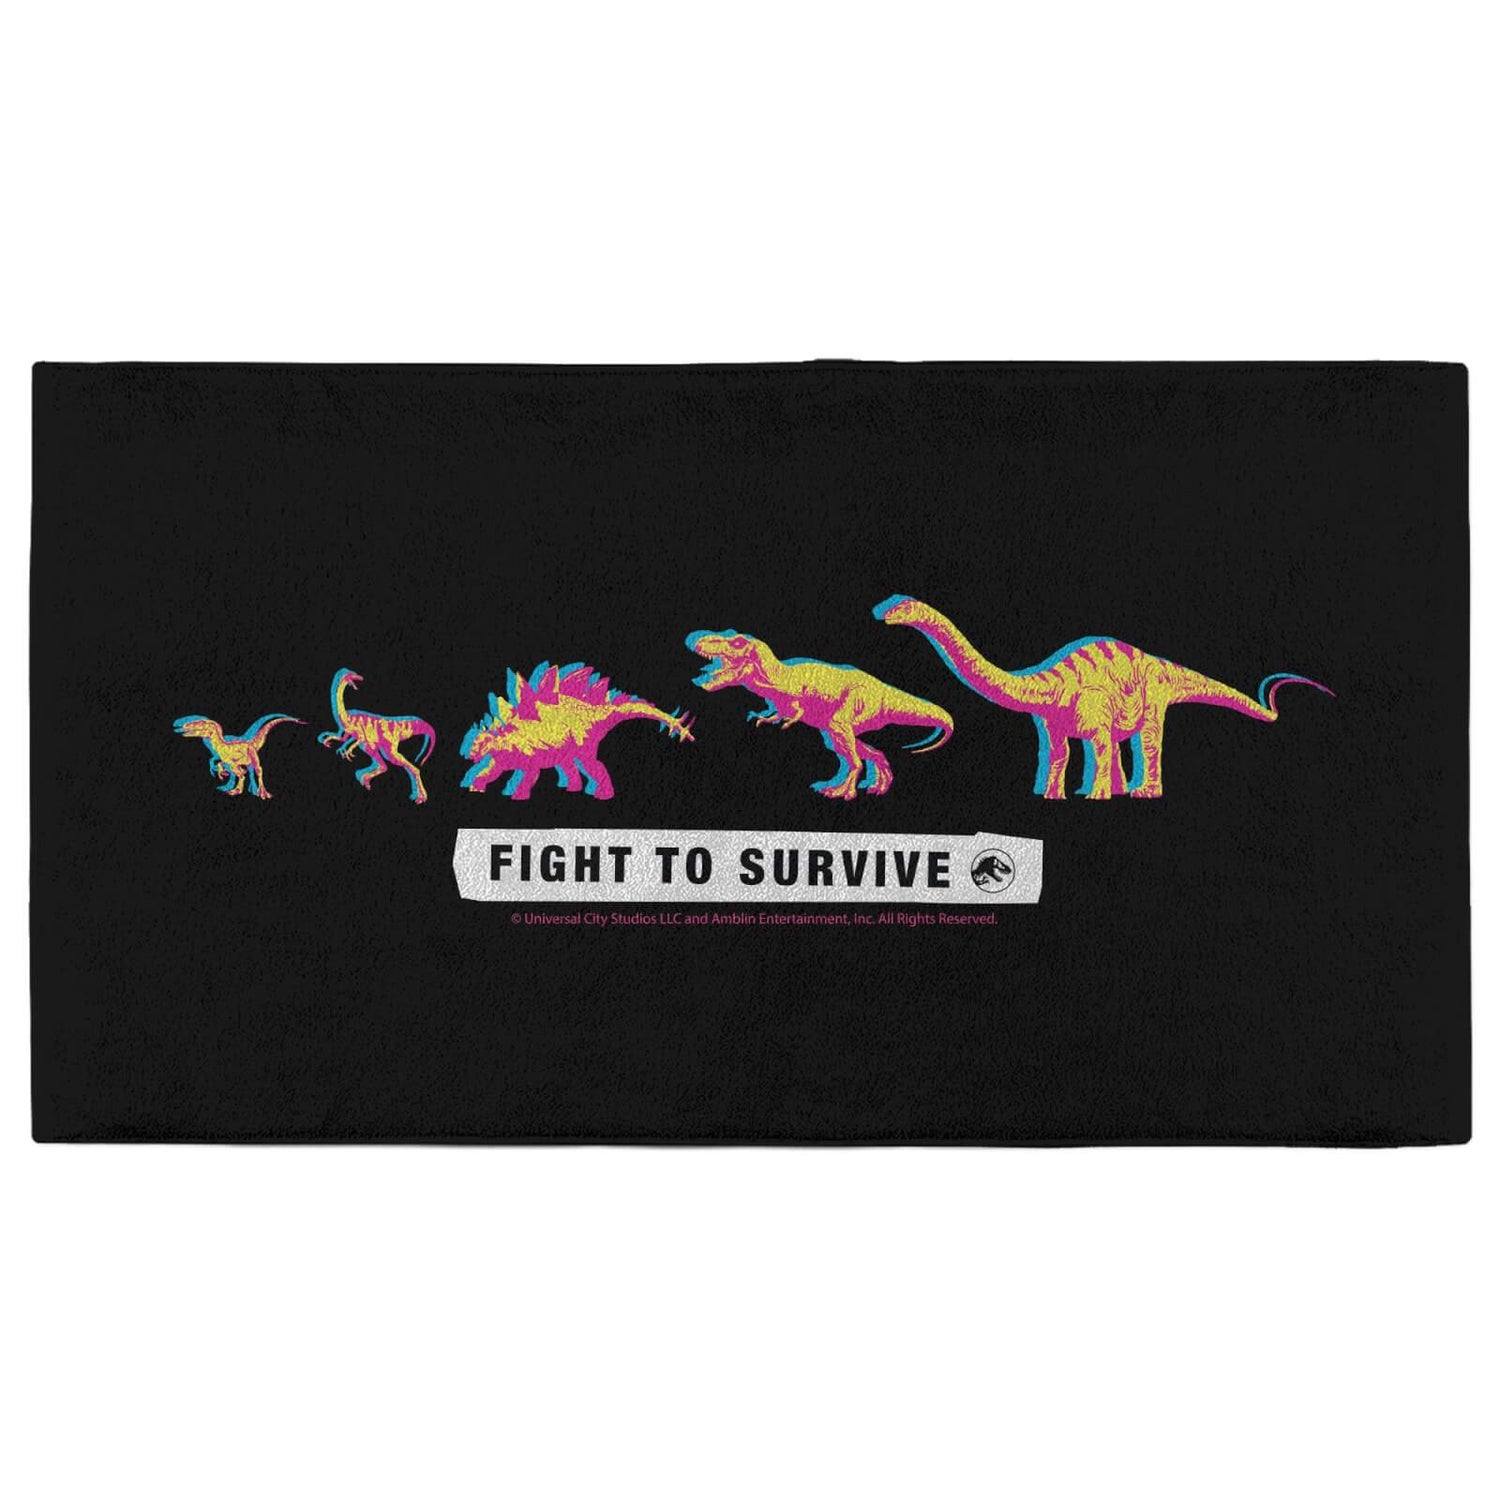 Jurassic Park Fight To Survive - Fitness Towel